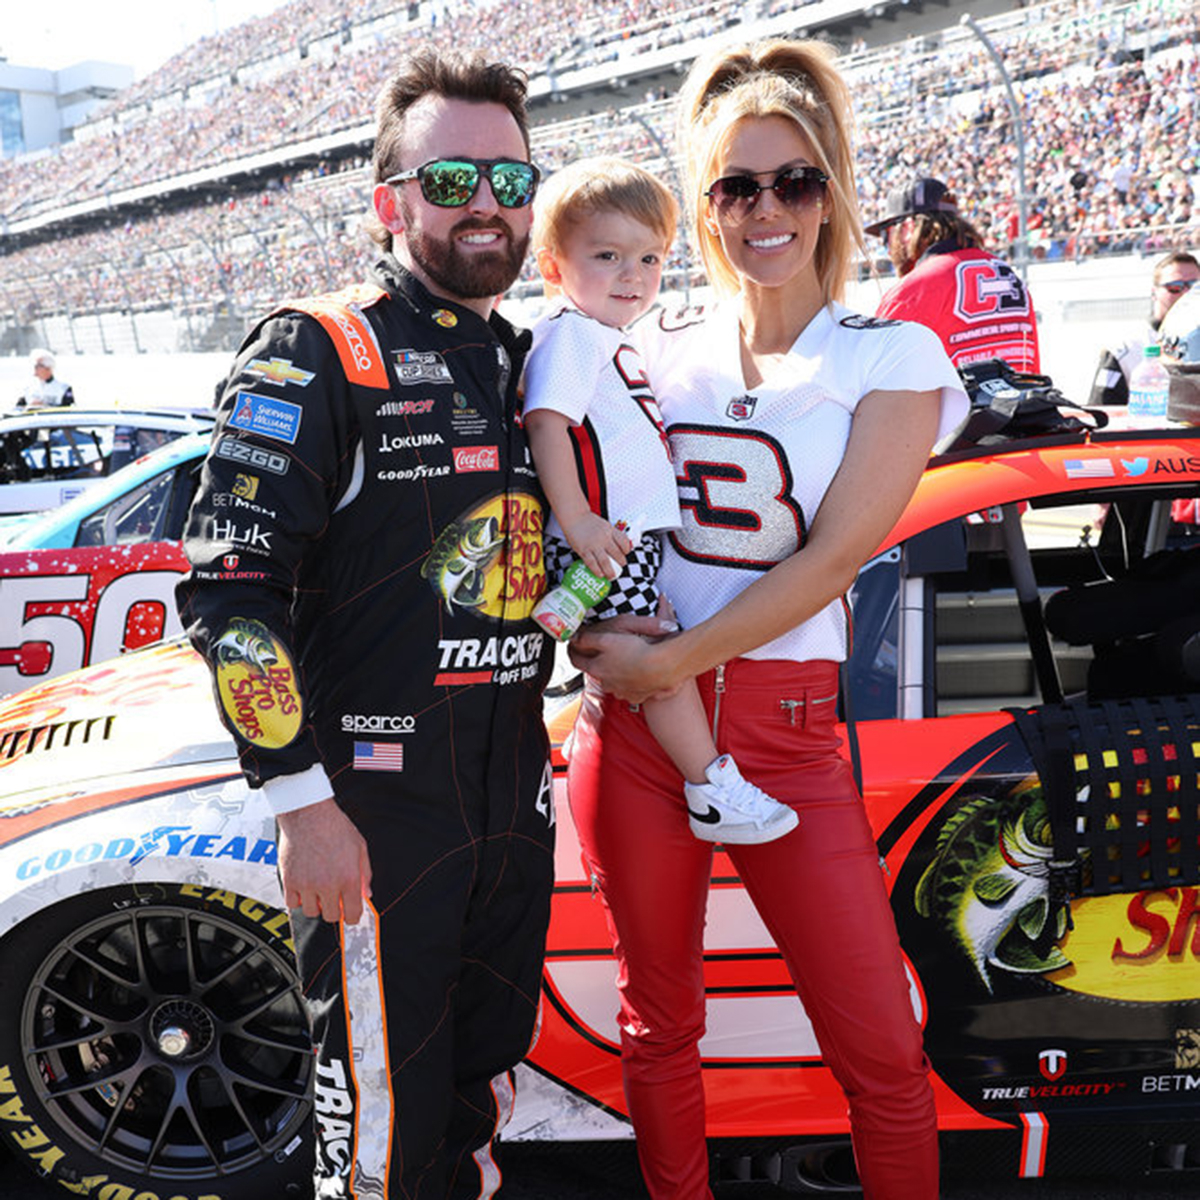 Albums 104+ Images life in the fast lane with austin dillon Updated